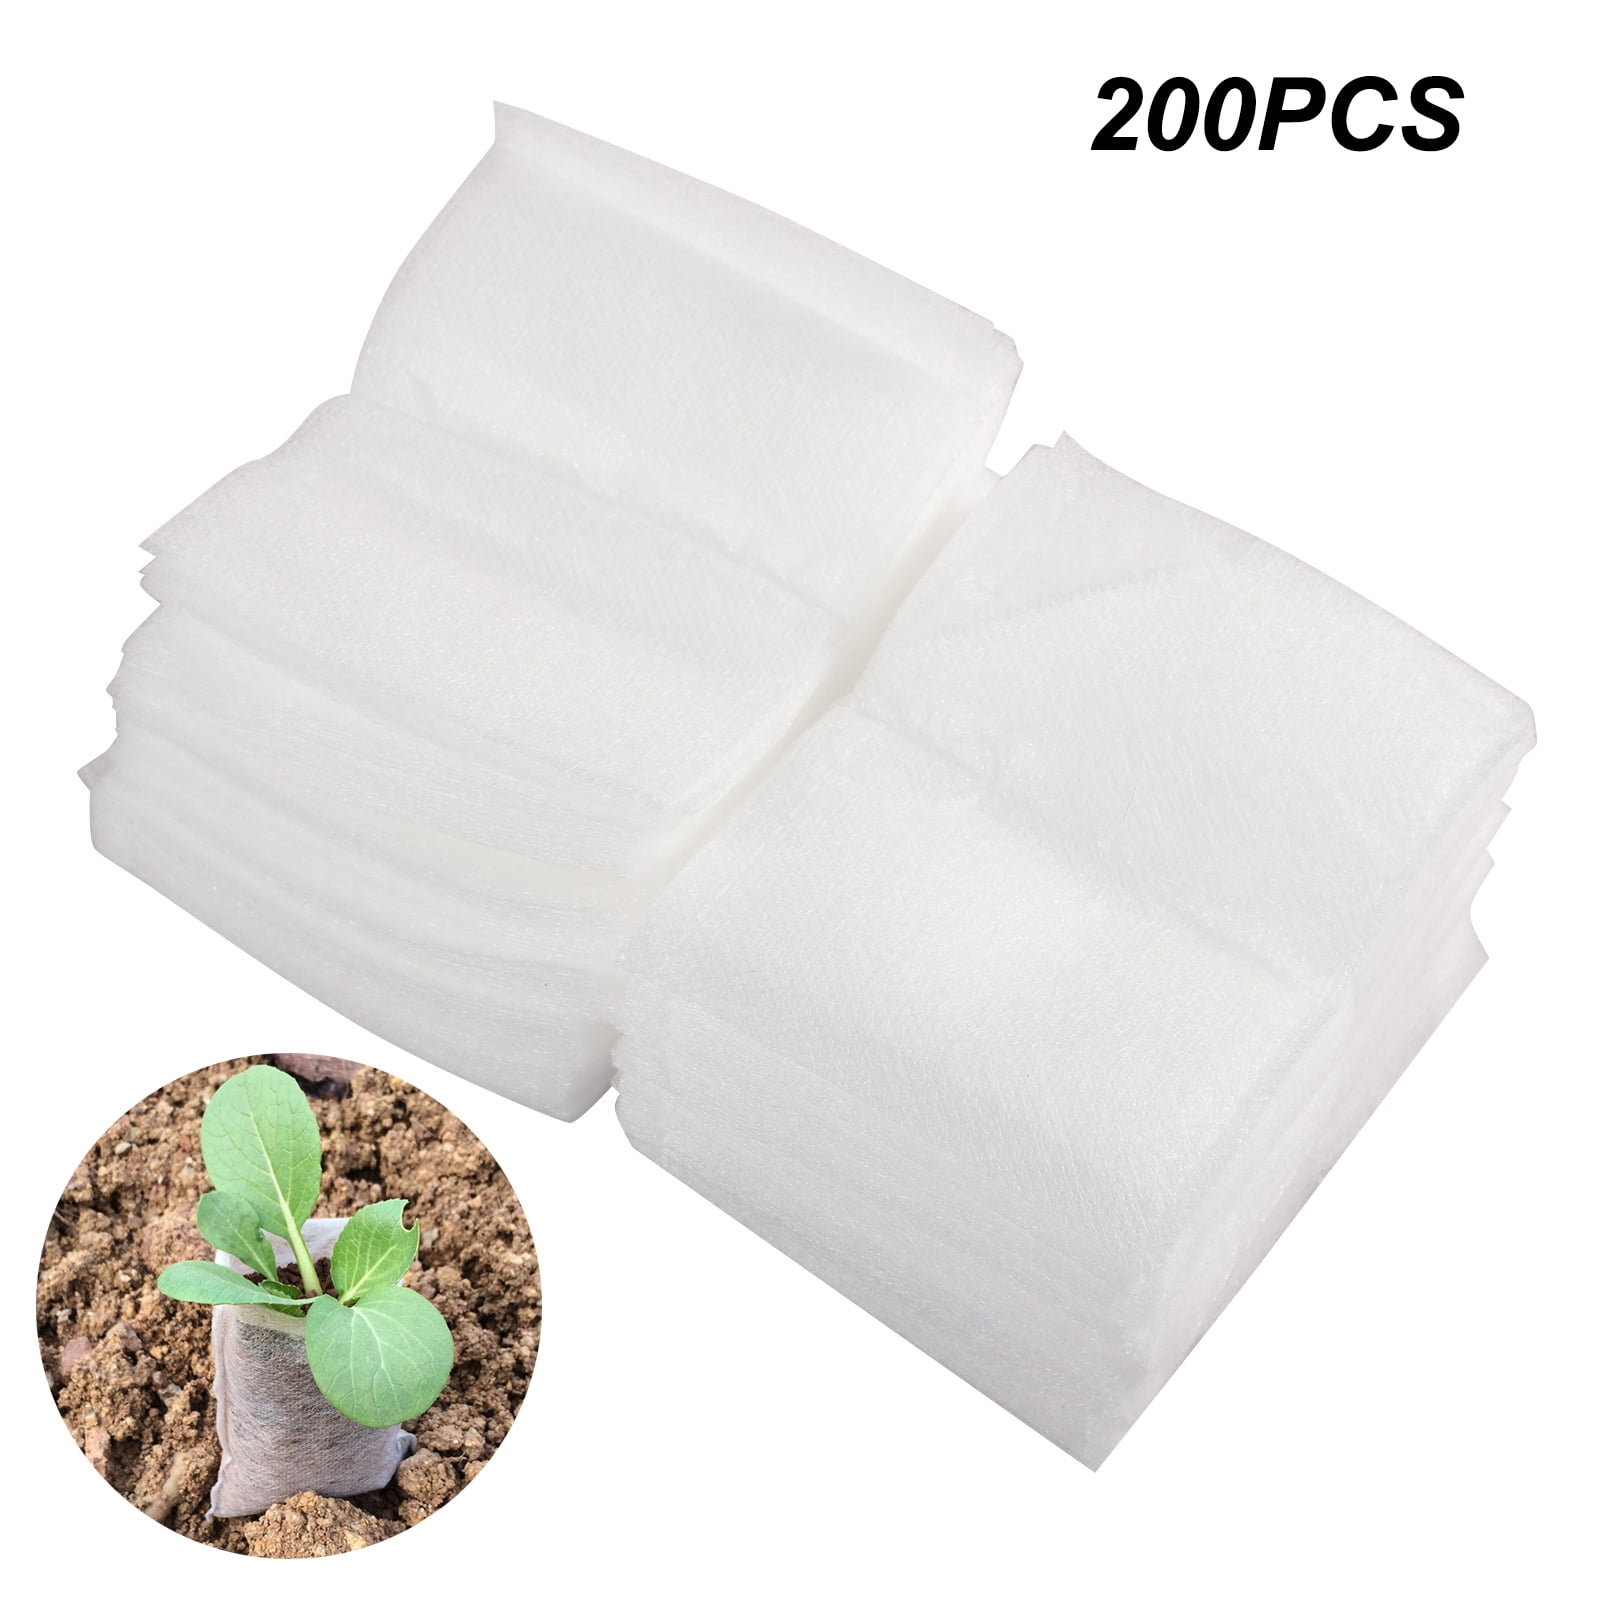 200pcs Non-Woven Seedling Nursery Bag Grow Planting Container Biodegradable